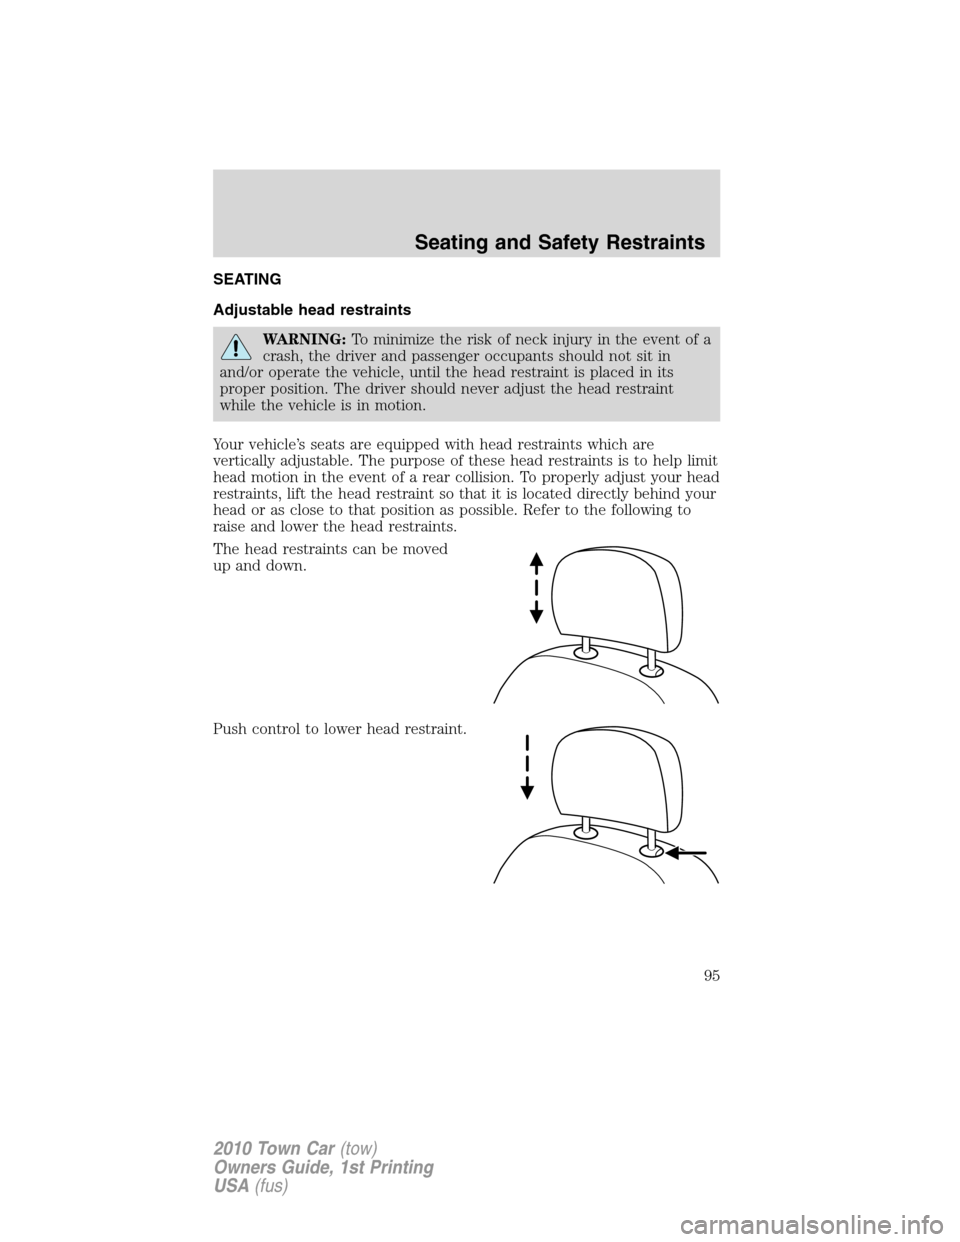 LINCOLN TOWN CAR 2010 Owners Guide SEATING
Adjustable head restraints
WARNING:To minimize the risk of neck injury in the event of a
crash, the driver and passenger occupants should not sit in
and/or operate the vehicle, until the head 